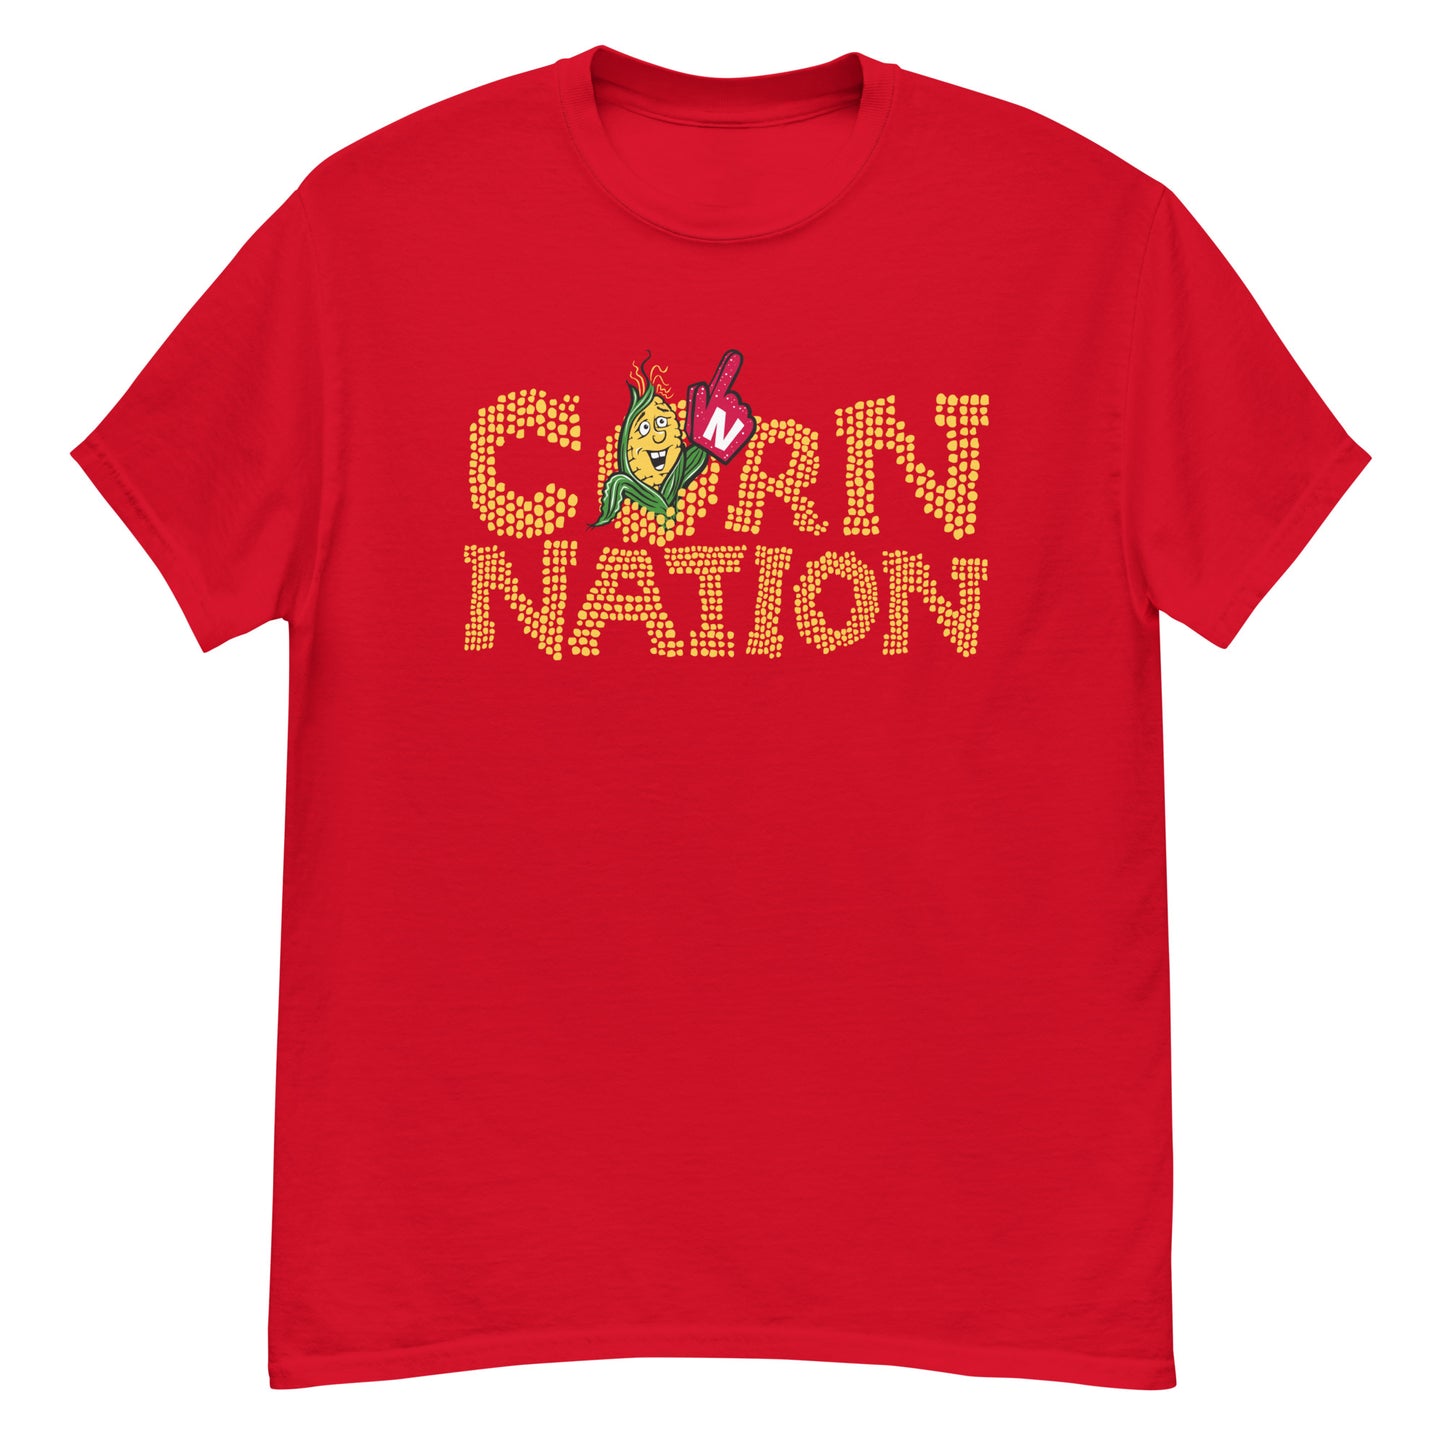 Cobby And Corn - THE CN T-SHIRT!